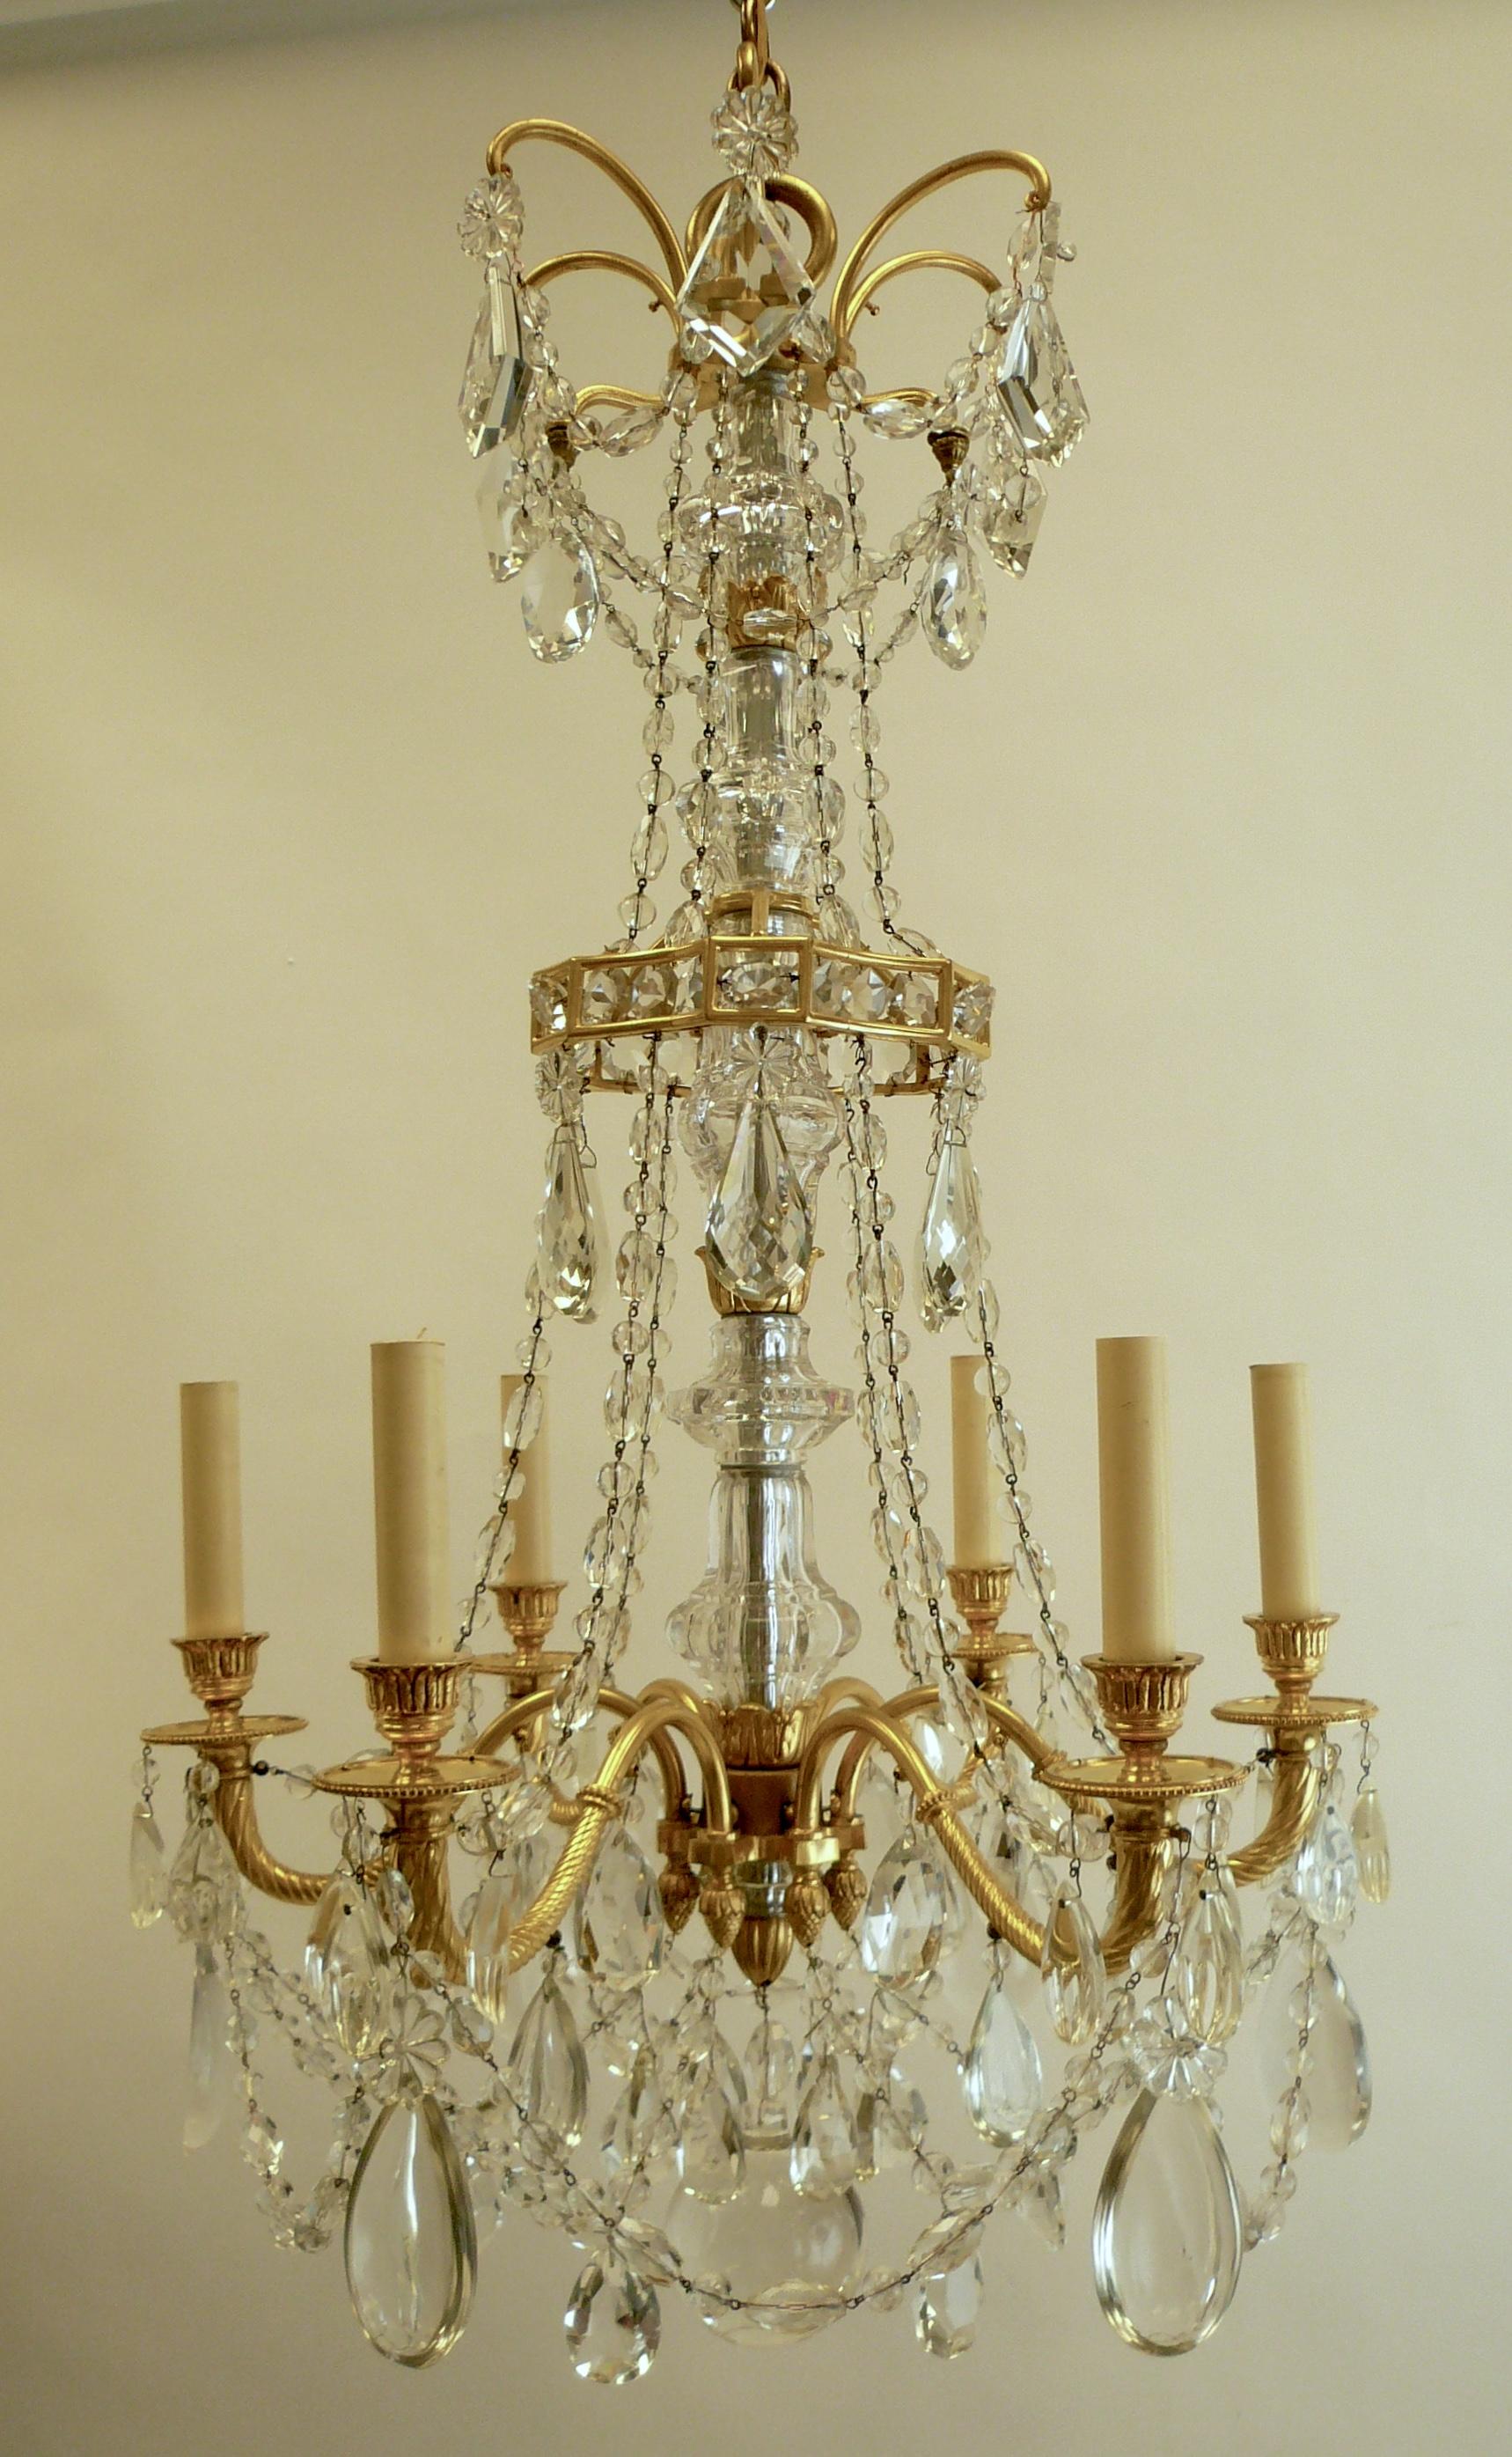 This signed Caldwell six-light chandelier is made of finely detailed gilt bronze and hung with faceted bead chain swags and cut crystal prisms. It has been newly rewired and ready for use.